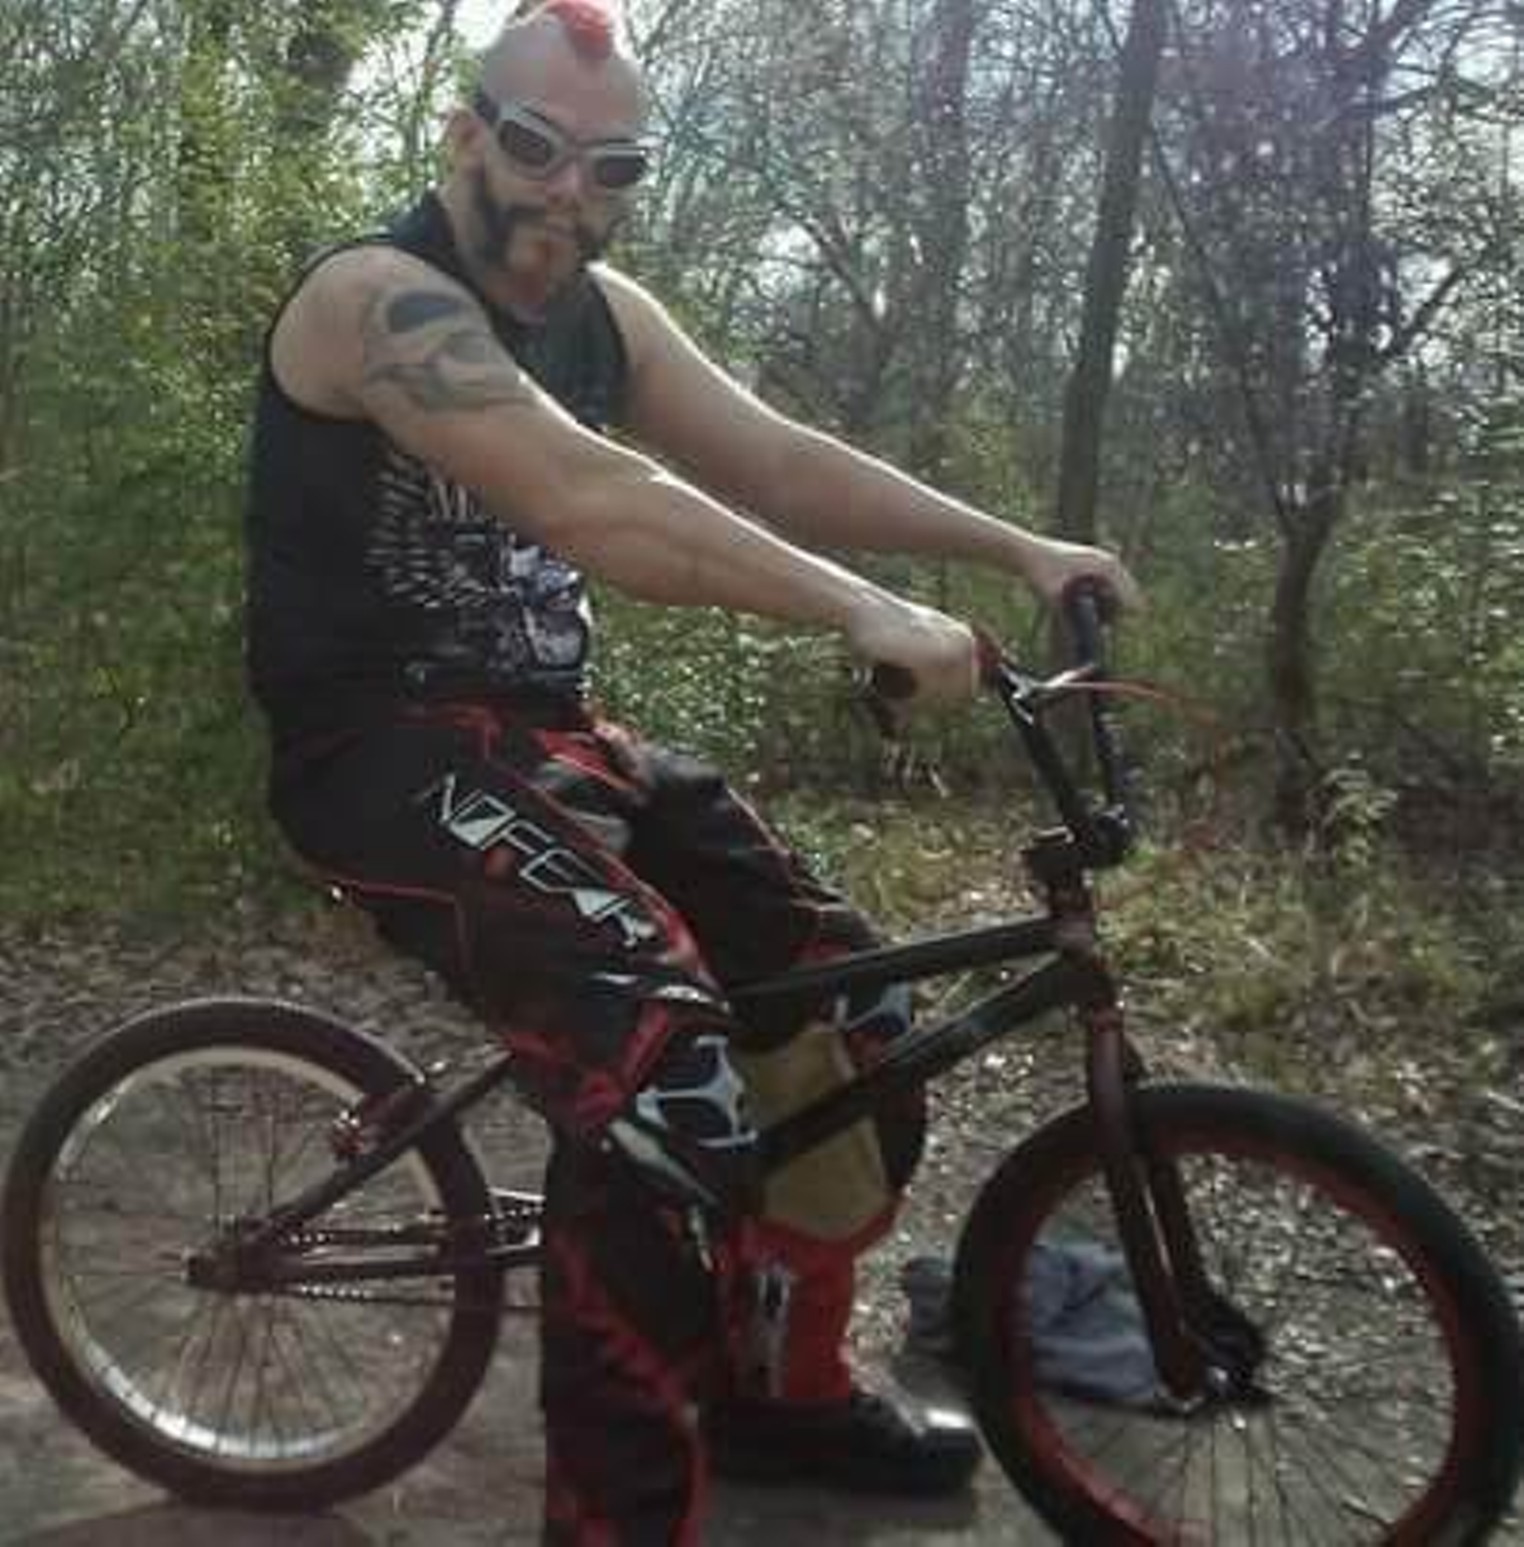 Local Bike Community Mourns the Loss of James Kincheloe and His ‘Childlike Fascination’